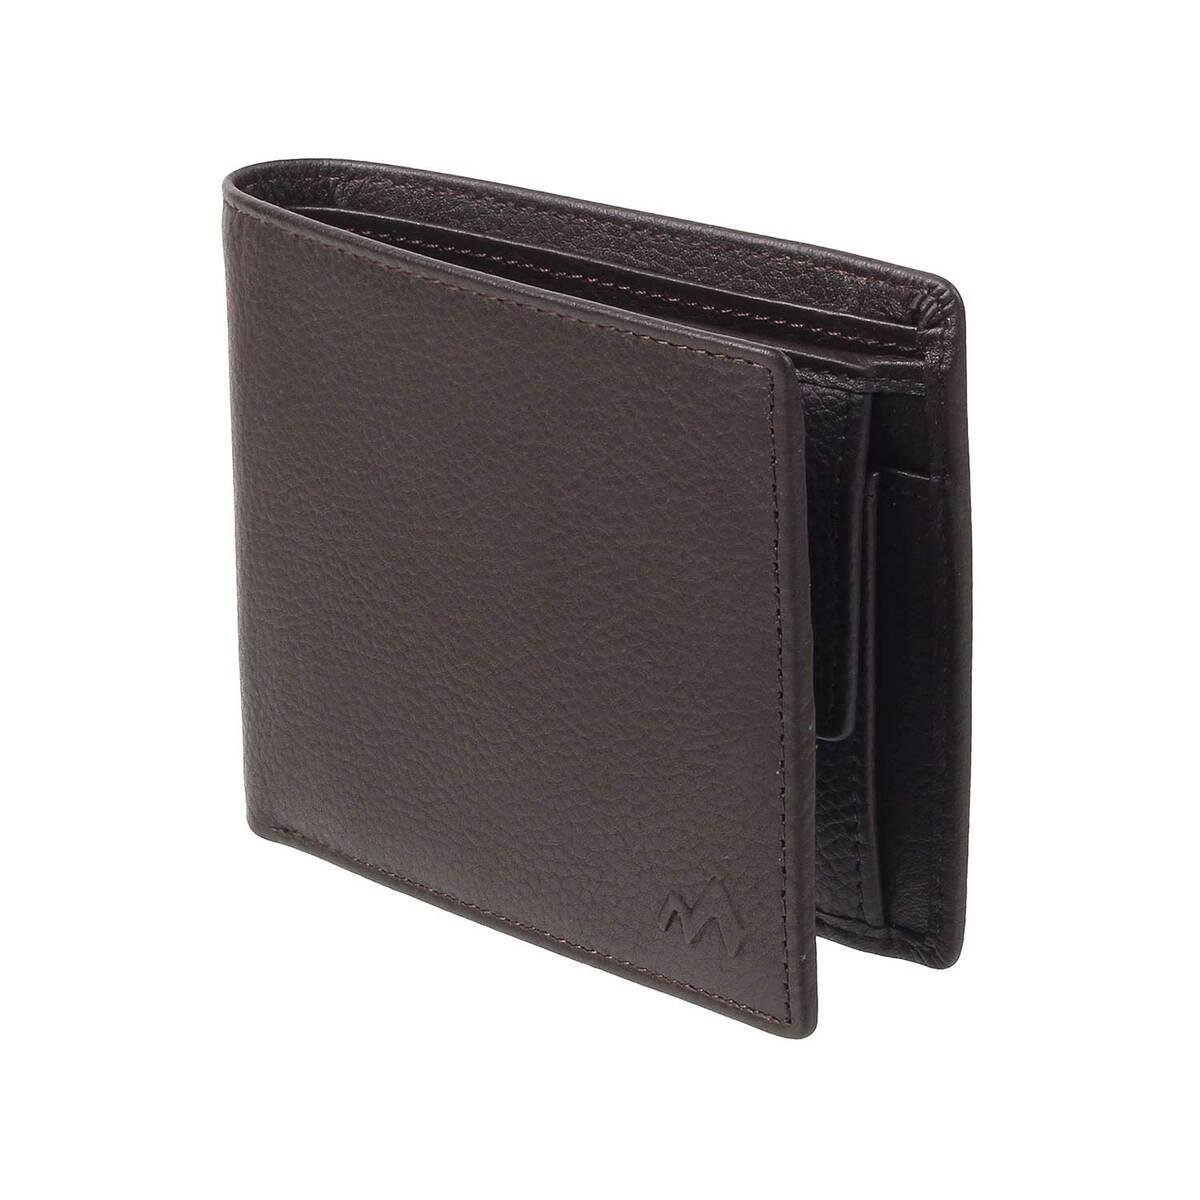 2021 Customized PU Leather Mens Wallet With Ridge Wallet Clip, Card Holder,  And Chain High Quality Brand Purse L231117 From Designer_beanie, $3.33 |  DHgate.Com